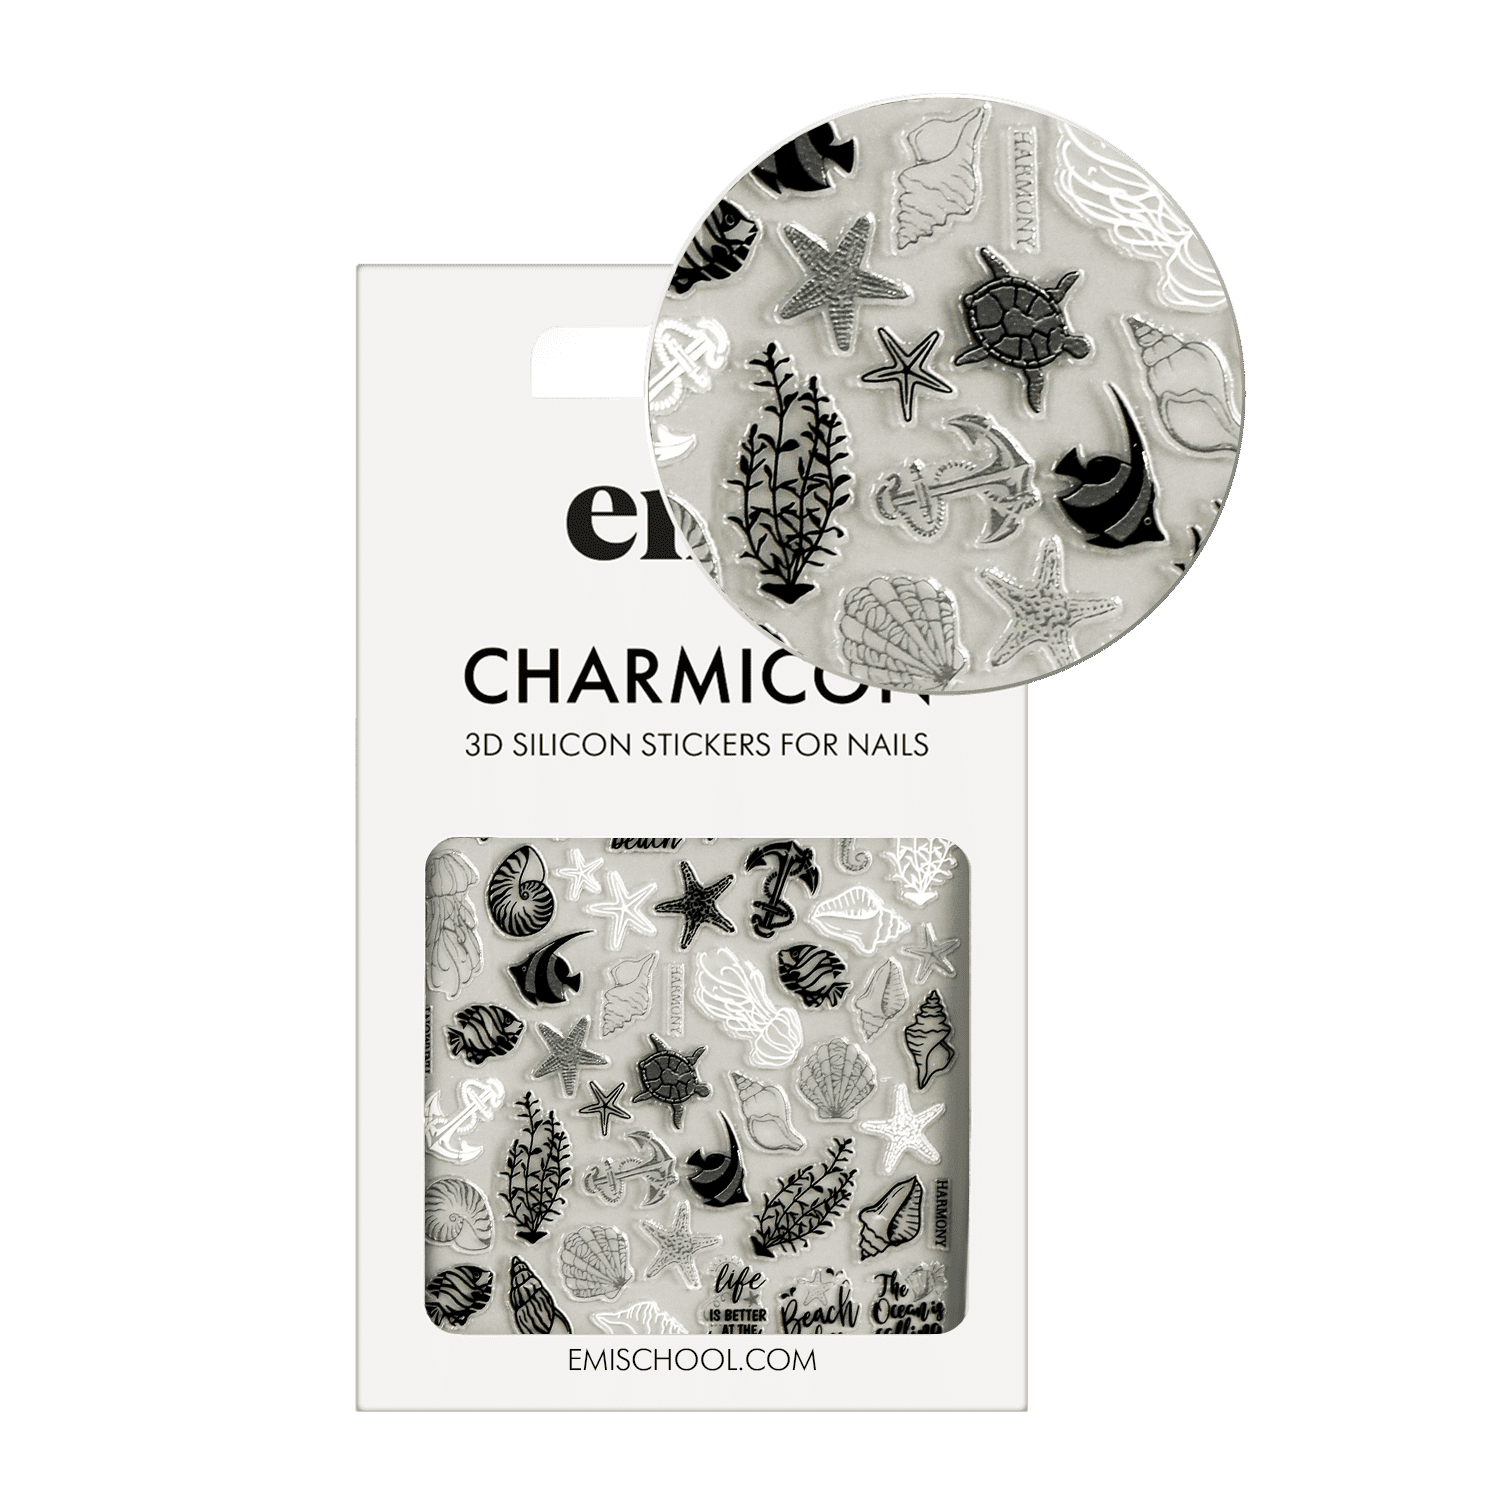 Charmicon 3D Silicone Stickers #250 Reef